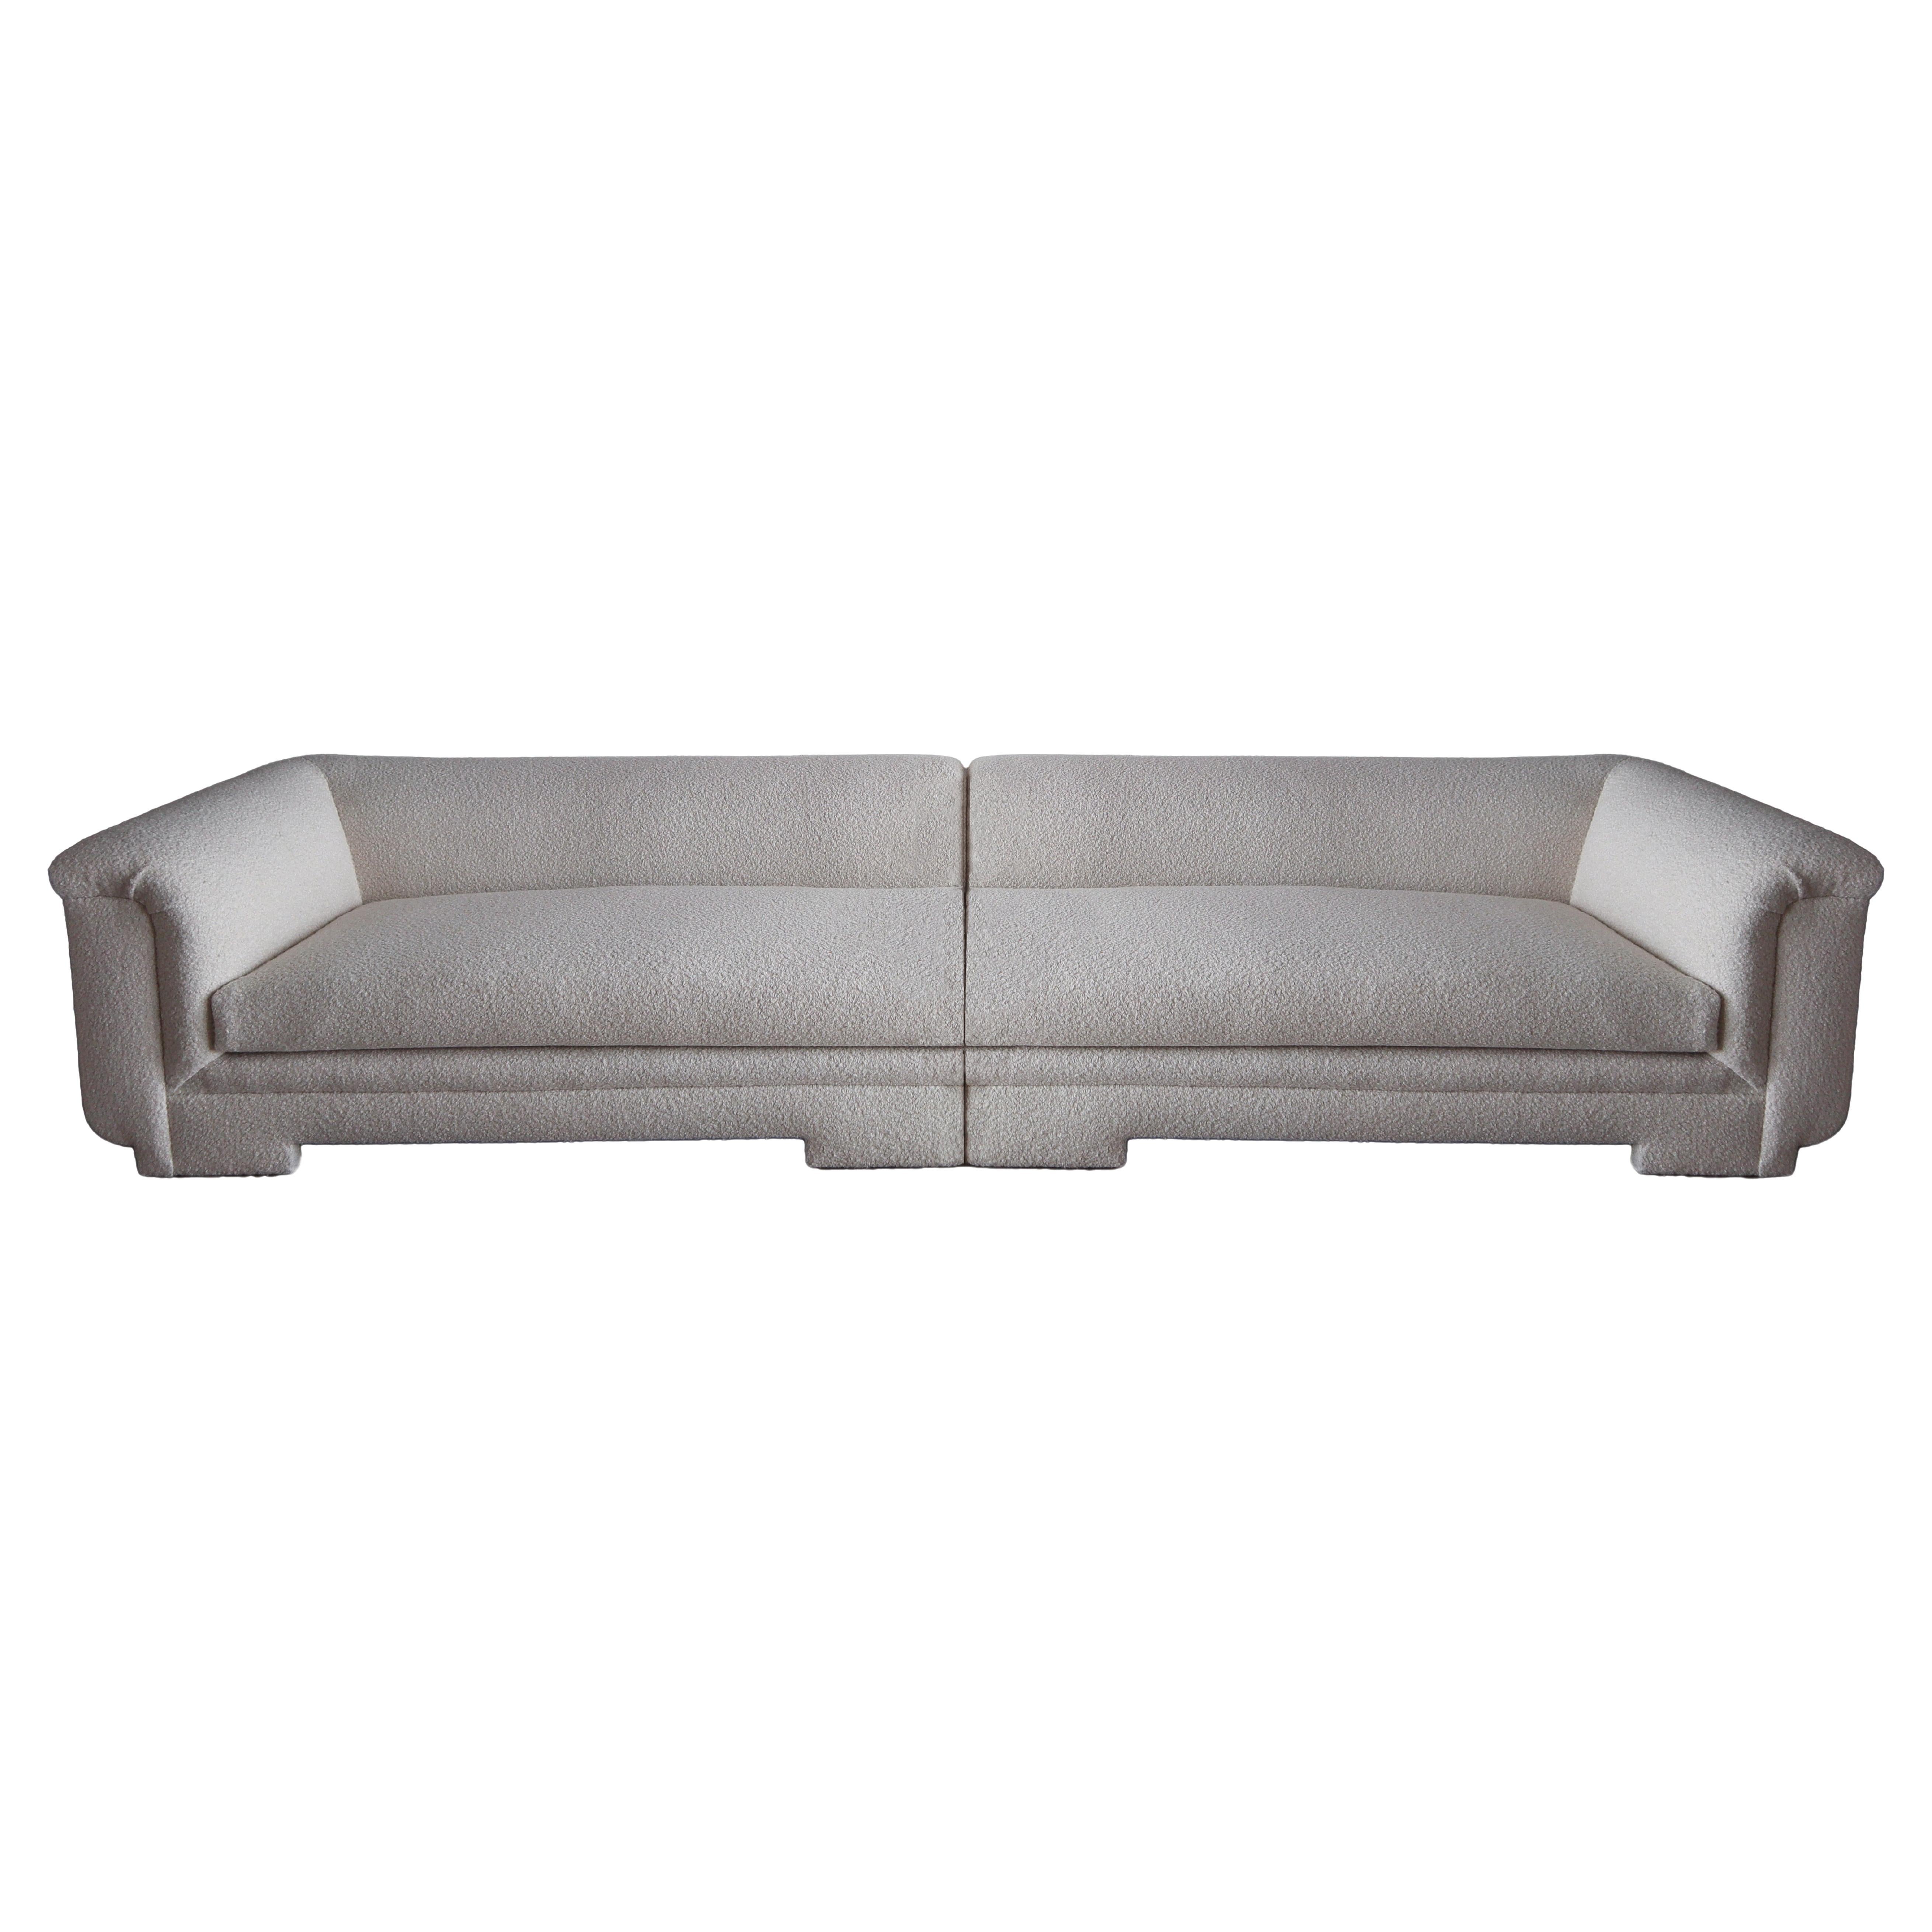 12 Foot 2-Piece Postmodern Sofa in Boucle For Sale